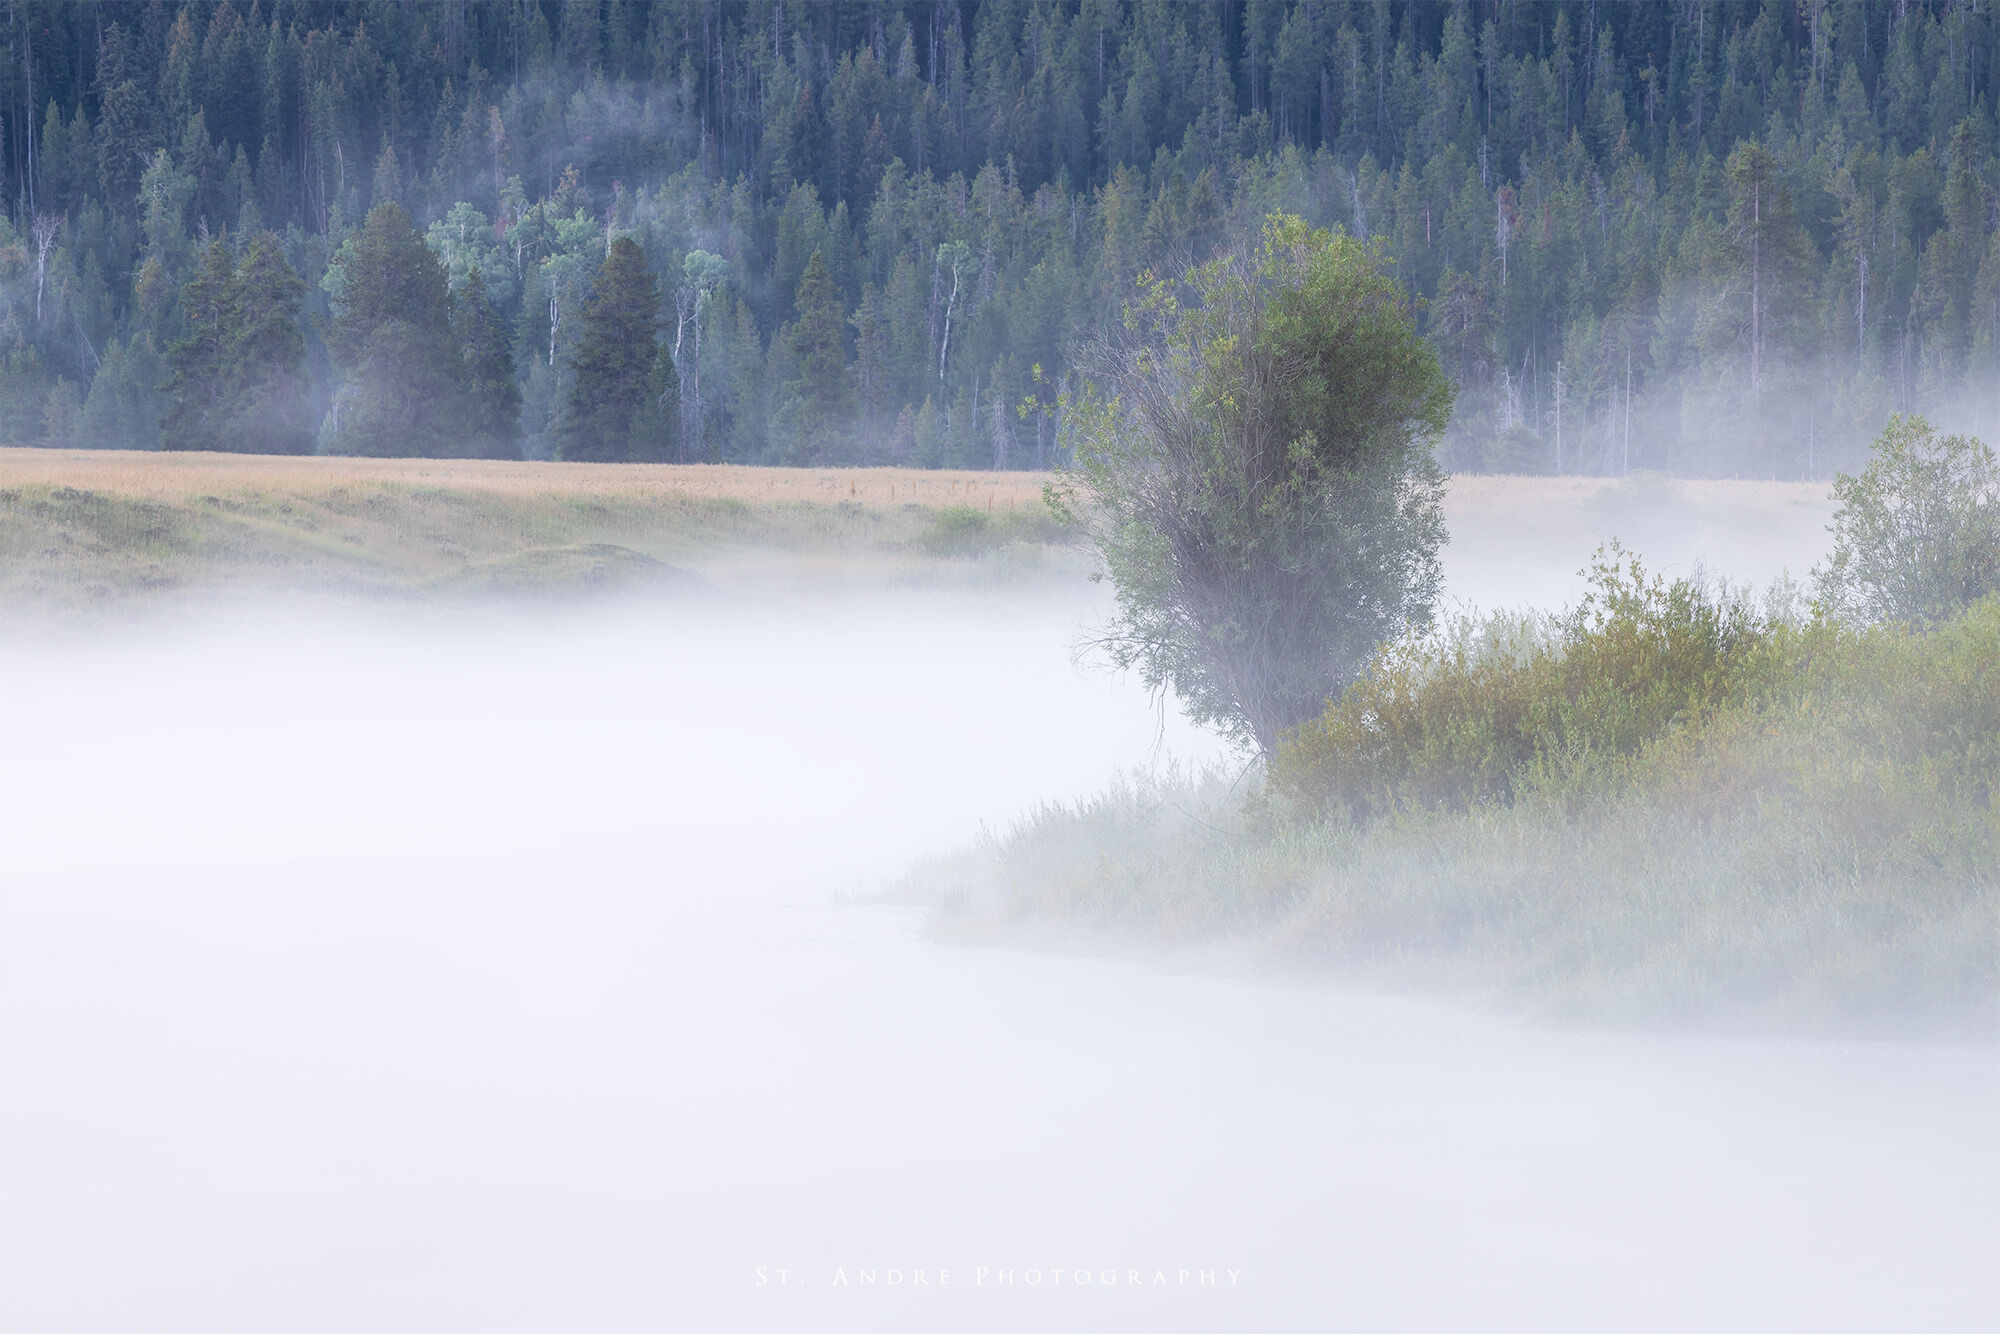 Mist rises over a river shrouding the trees in the foreground and the background at Oxbow Bend in Grand Teton National Park